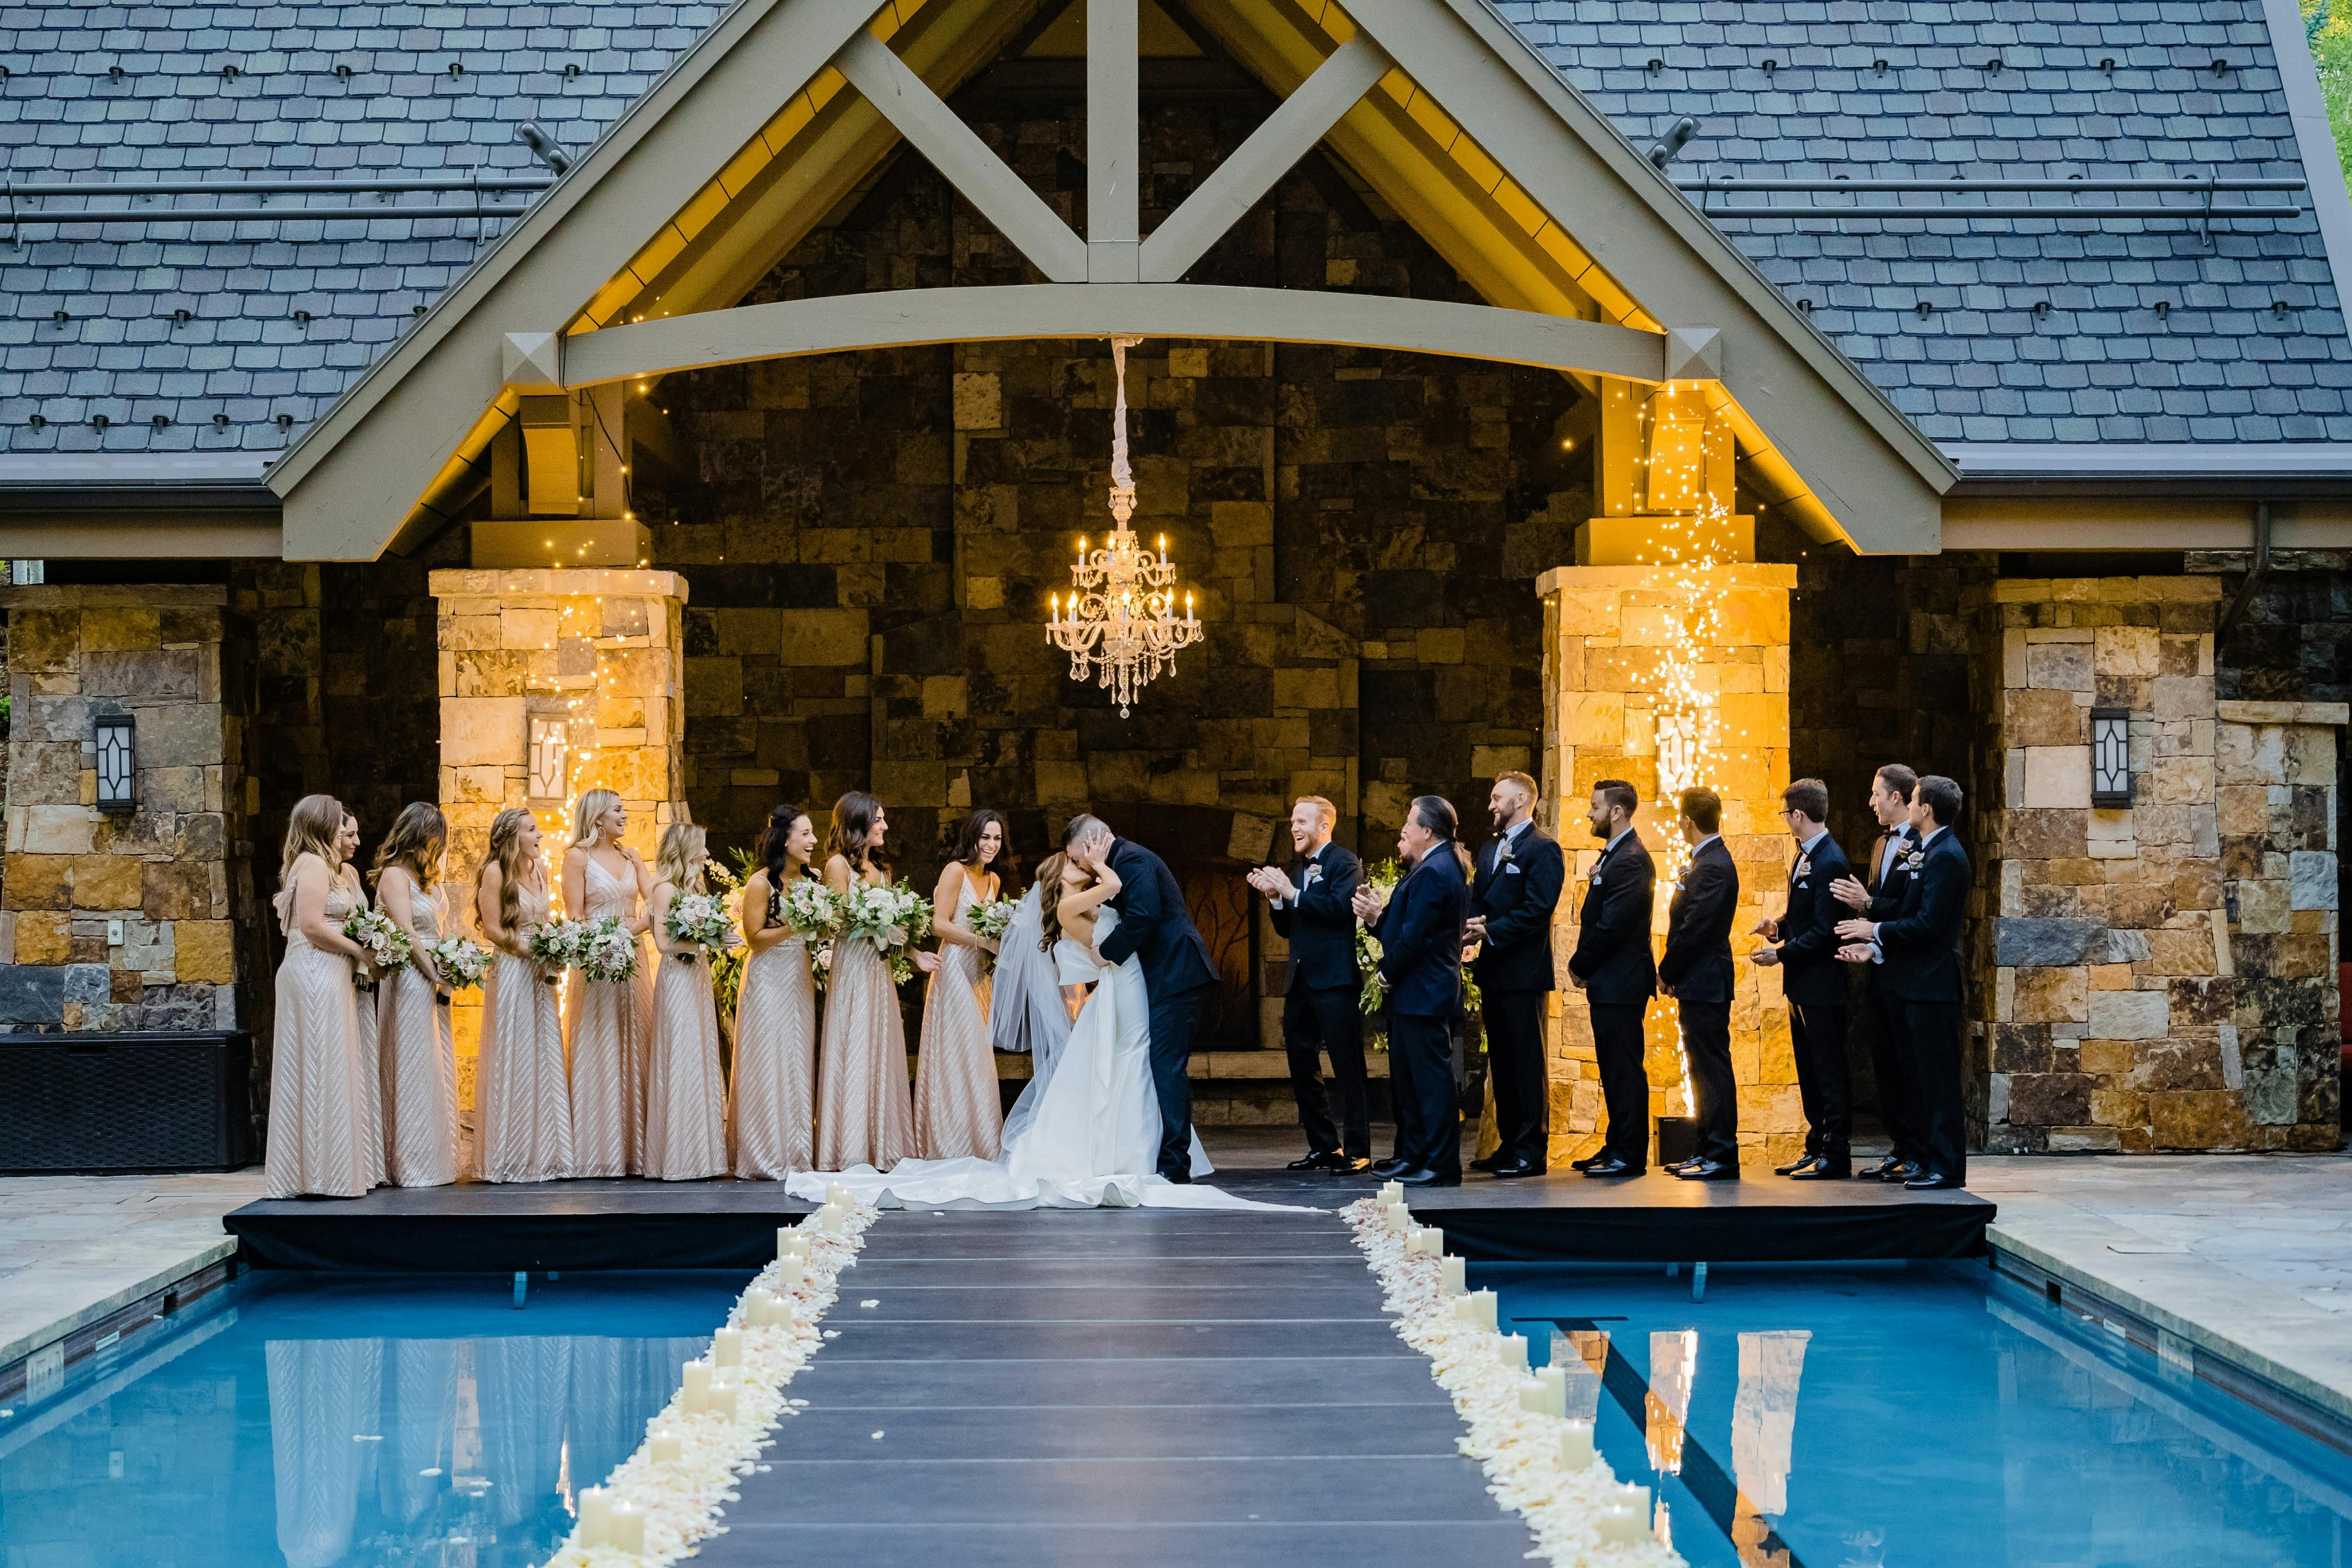 Fairytale Vail Wedding With Unique Wedding Aisle Suspended Over Swimming Pool | PartySlate